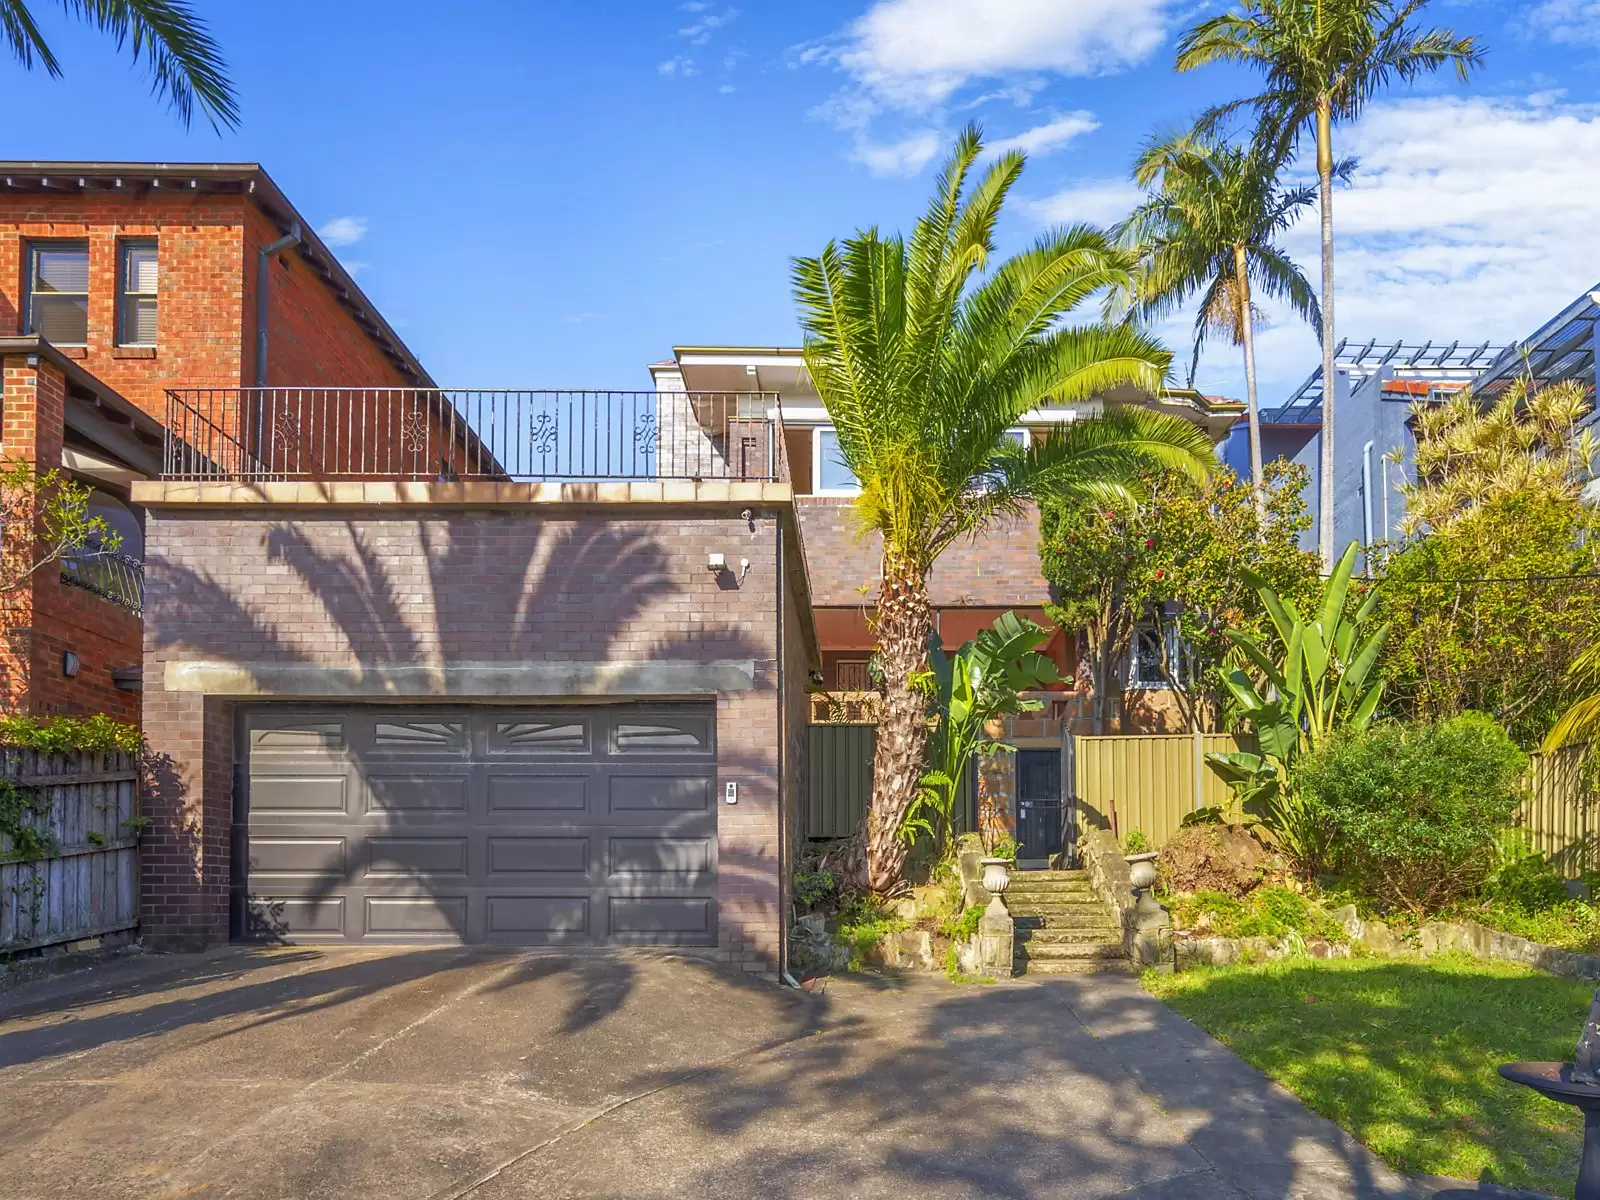 Photo #2: 23 Village High Road, Vaucluse - Sold by Sydney Sotheby's International Realty